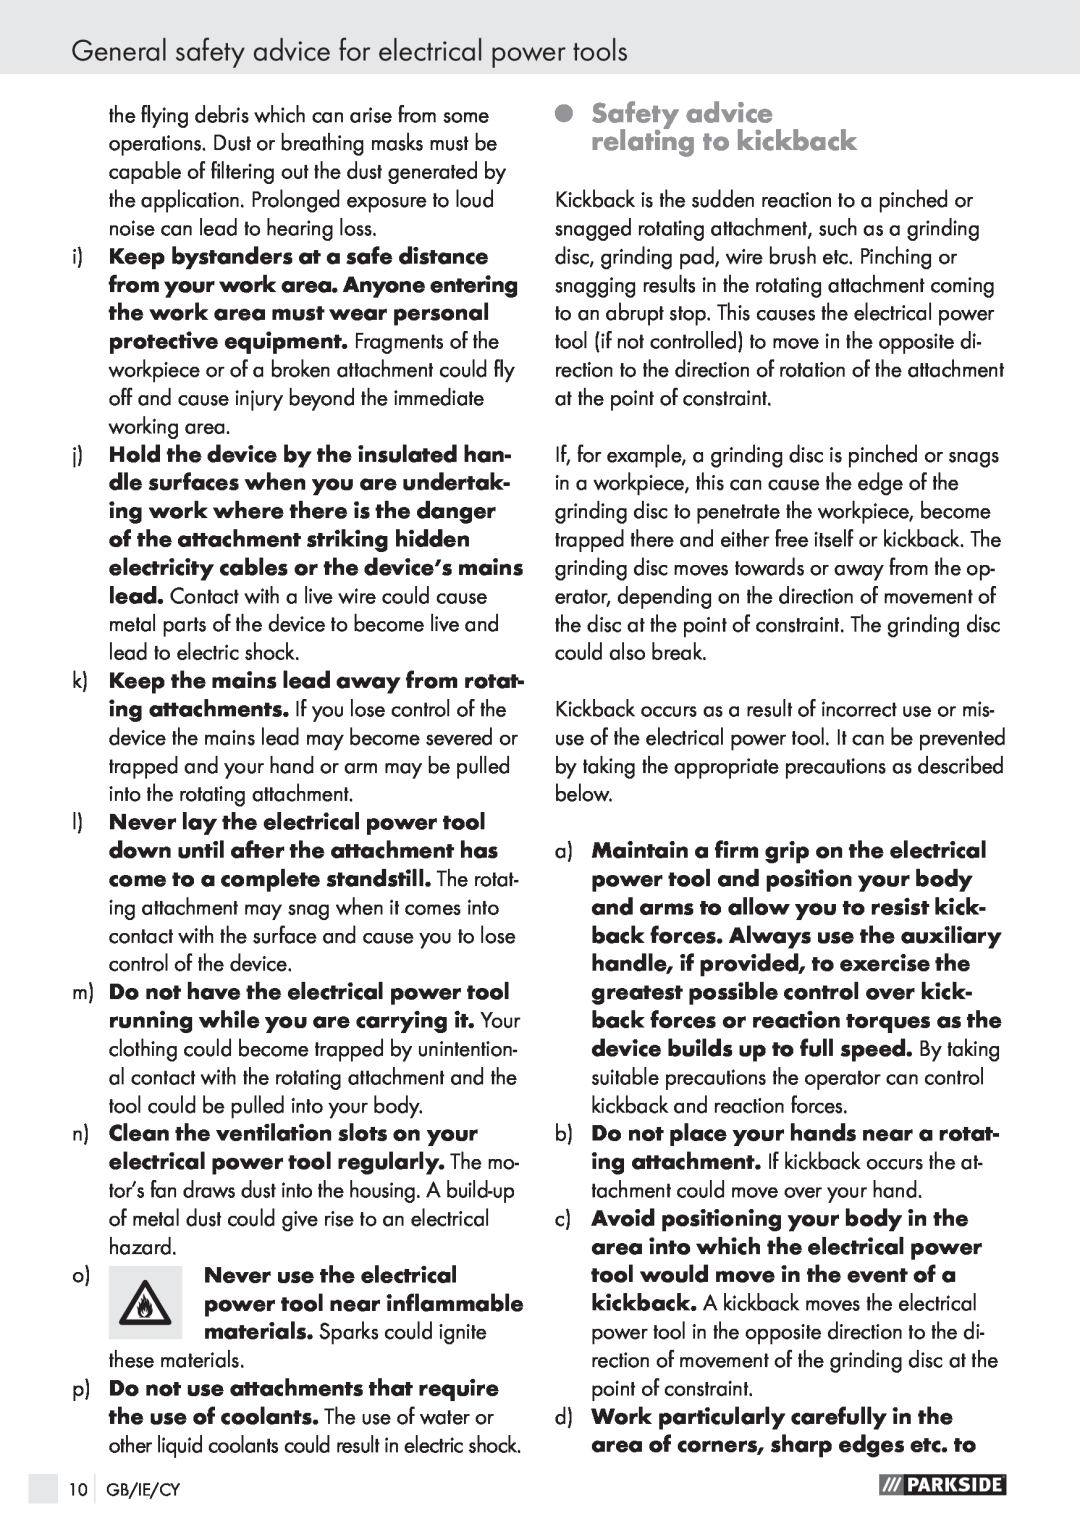 Parkside PWS 230 SE manual Safety advice relating to kickback, General safety advice for electrical power tools 